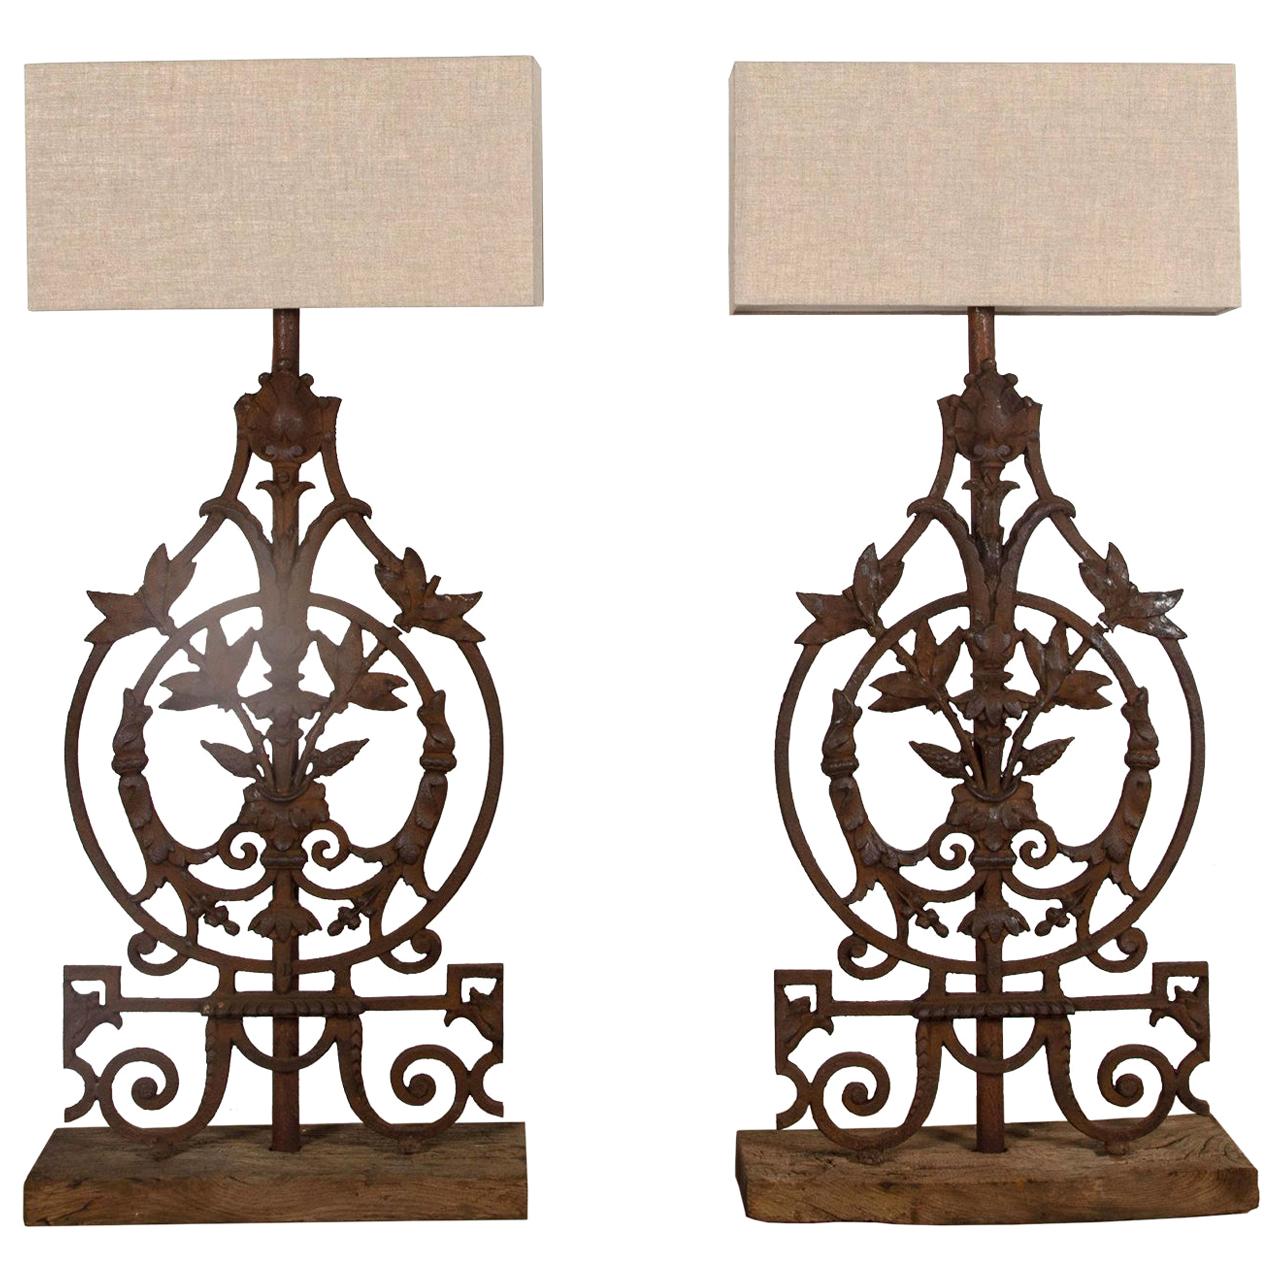 Pair of 18th Century Balustrade Lamps on Wooden Bases